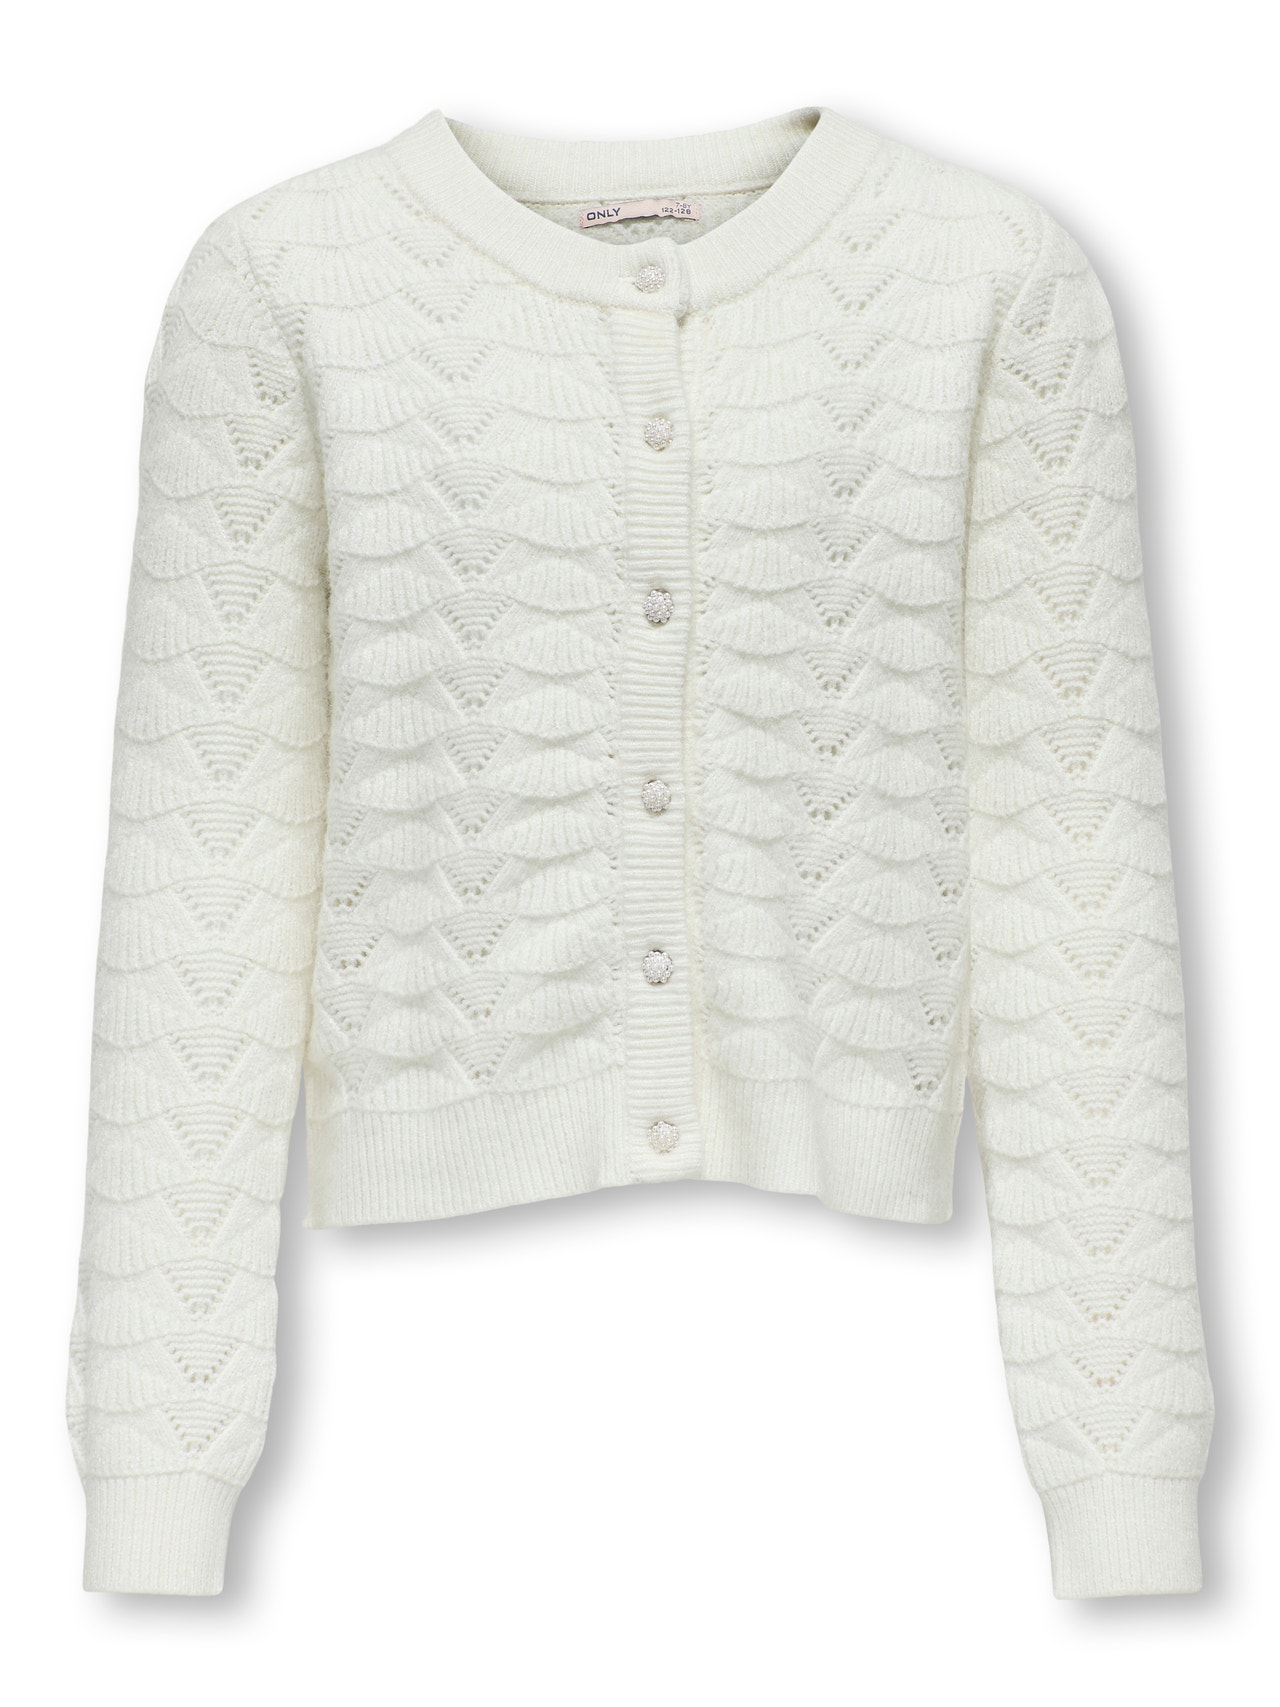 ONLY Regular Fit Round Neck Ribbed cuffs Knit Cardigan -Cloud Dancer - 15313540